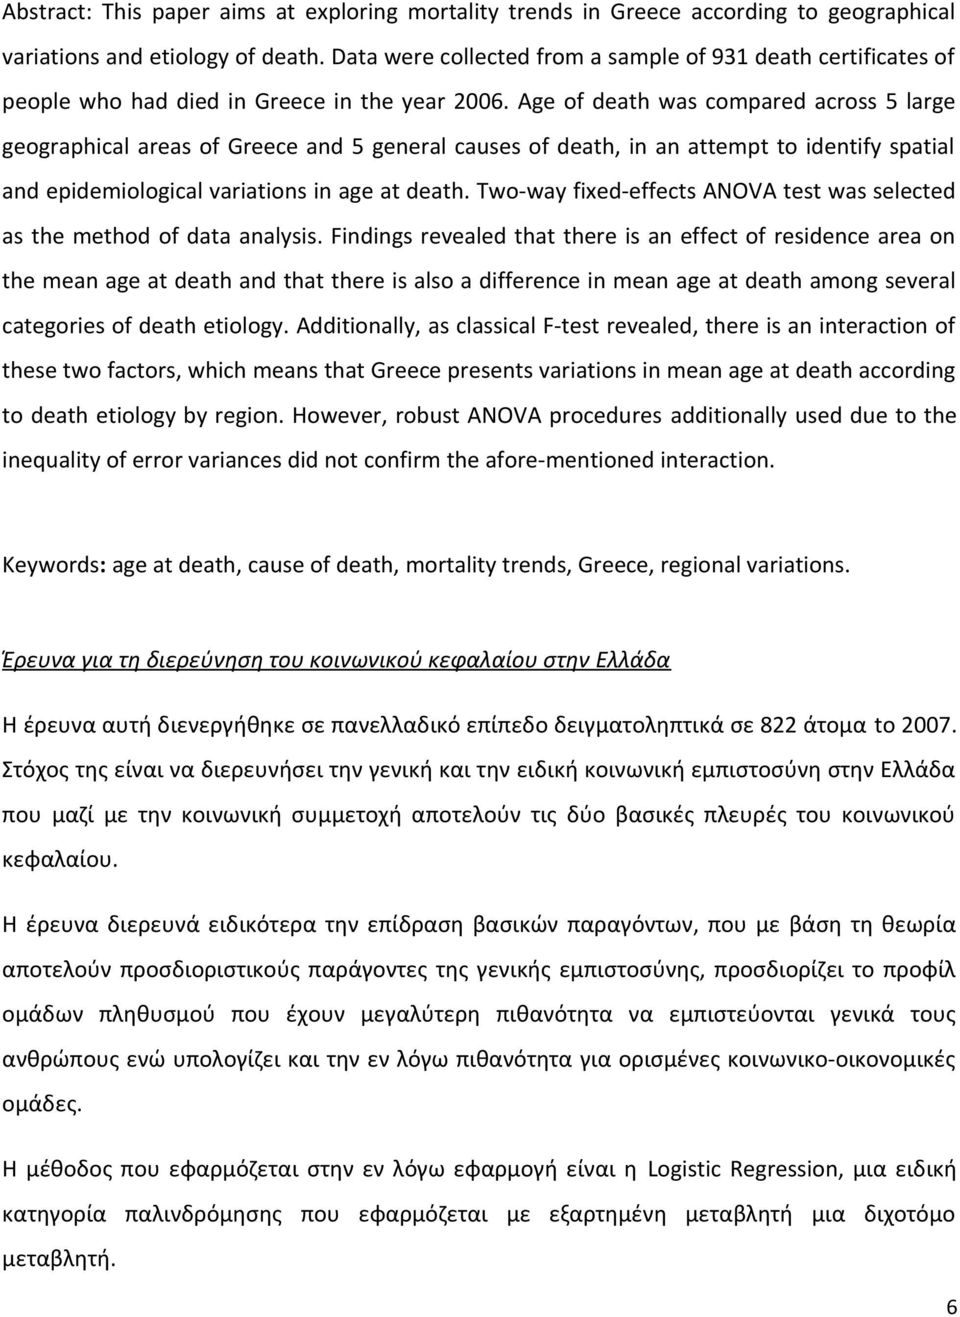 Age of death was compared across 5 large geographical areas of Greece and 5 general causes of death, in an attempt to identify spatial and epidemiological variations in age at death.